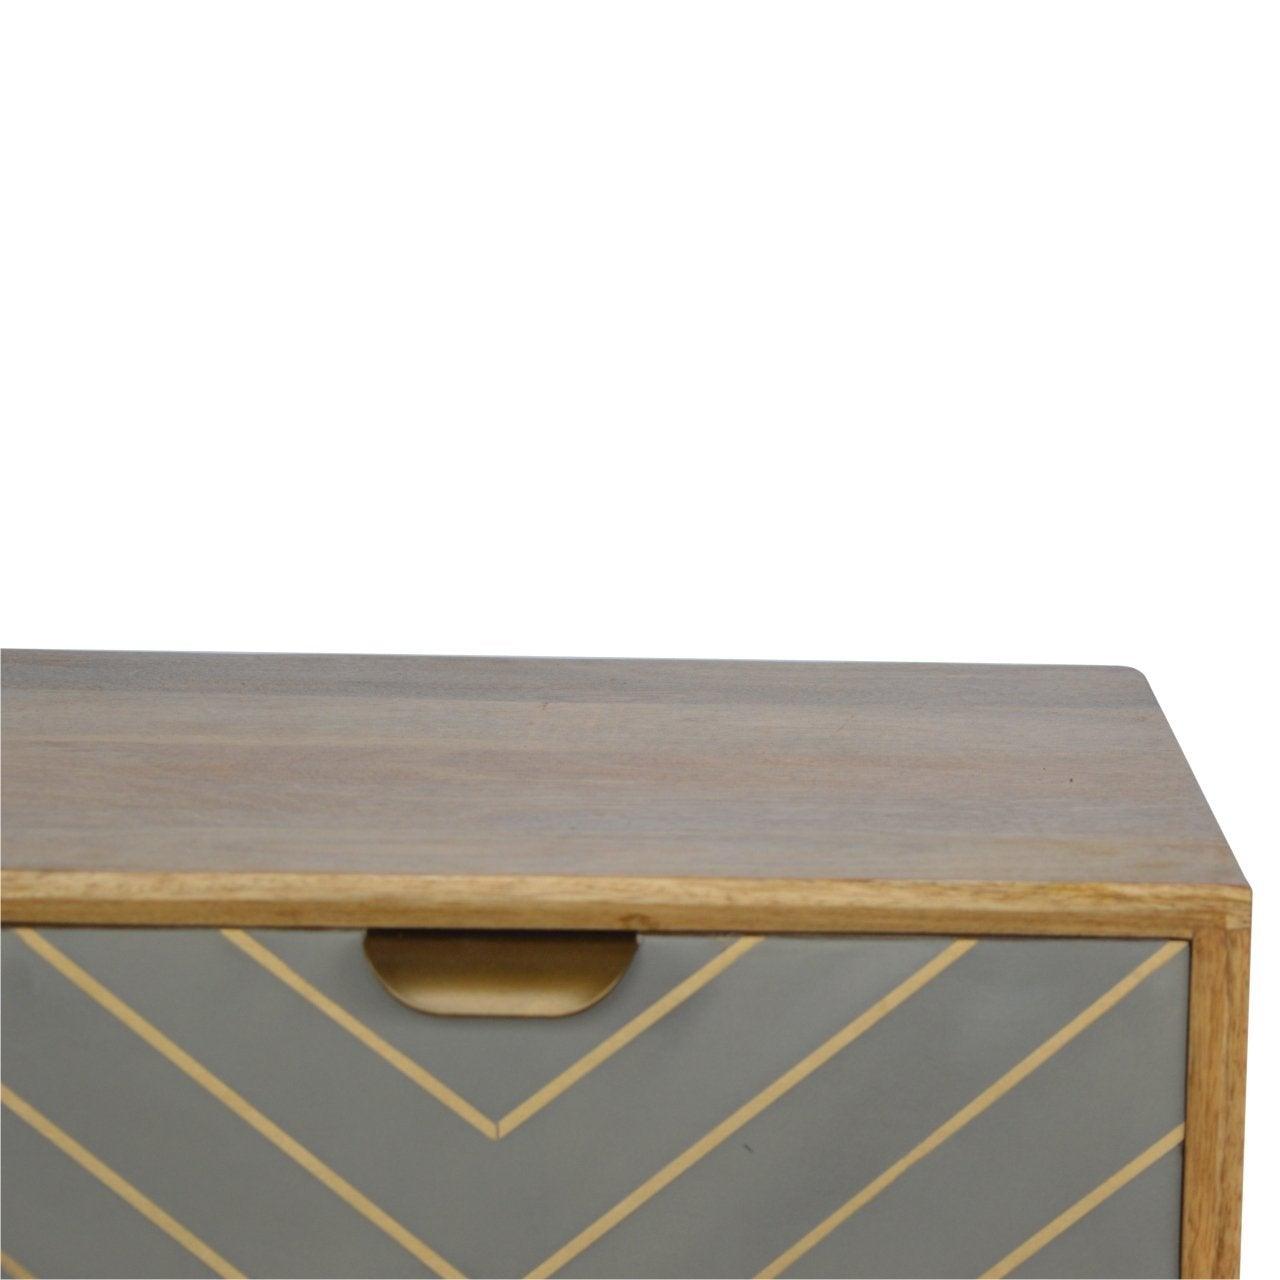 Sleek cement brass inlay bedside table with open slot - crimblefest furniture - image 6